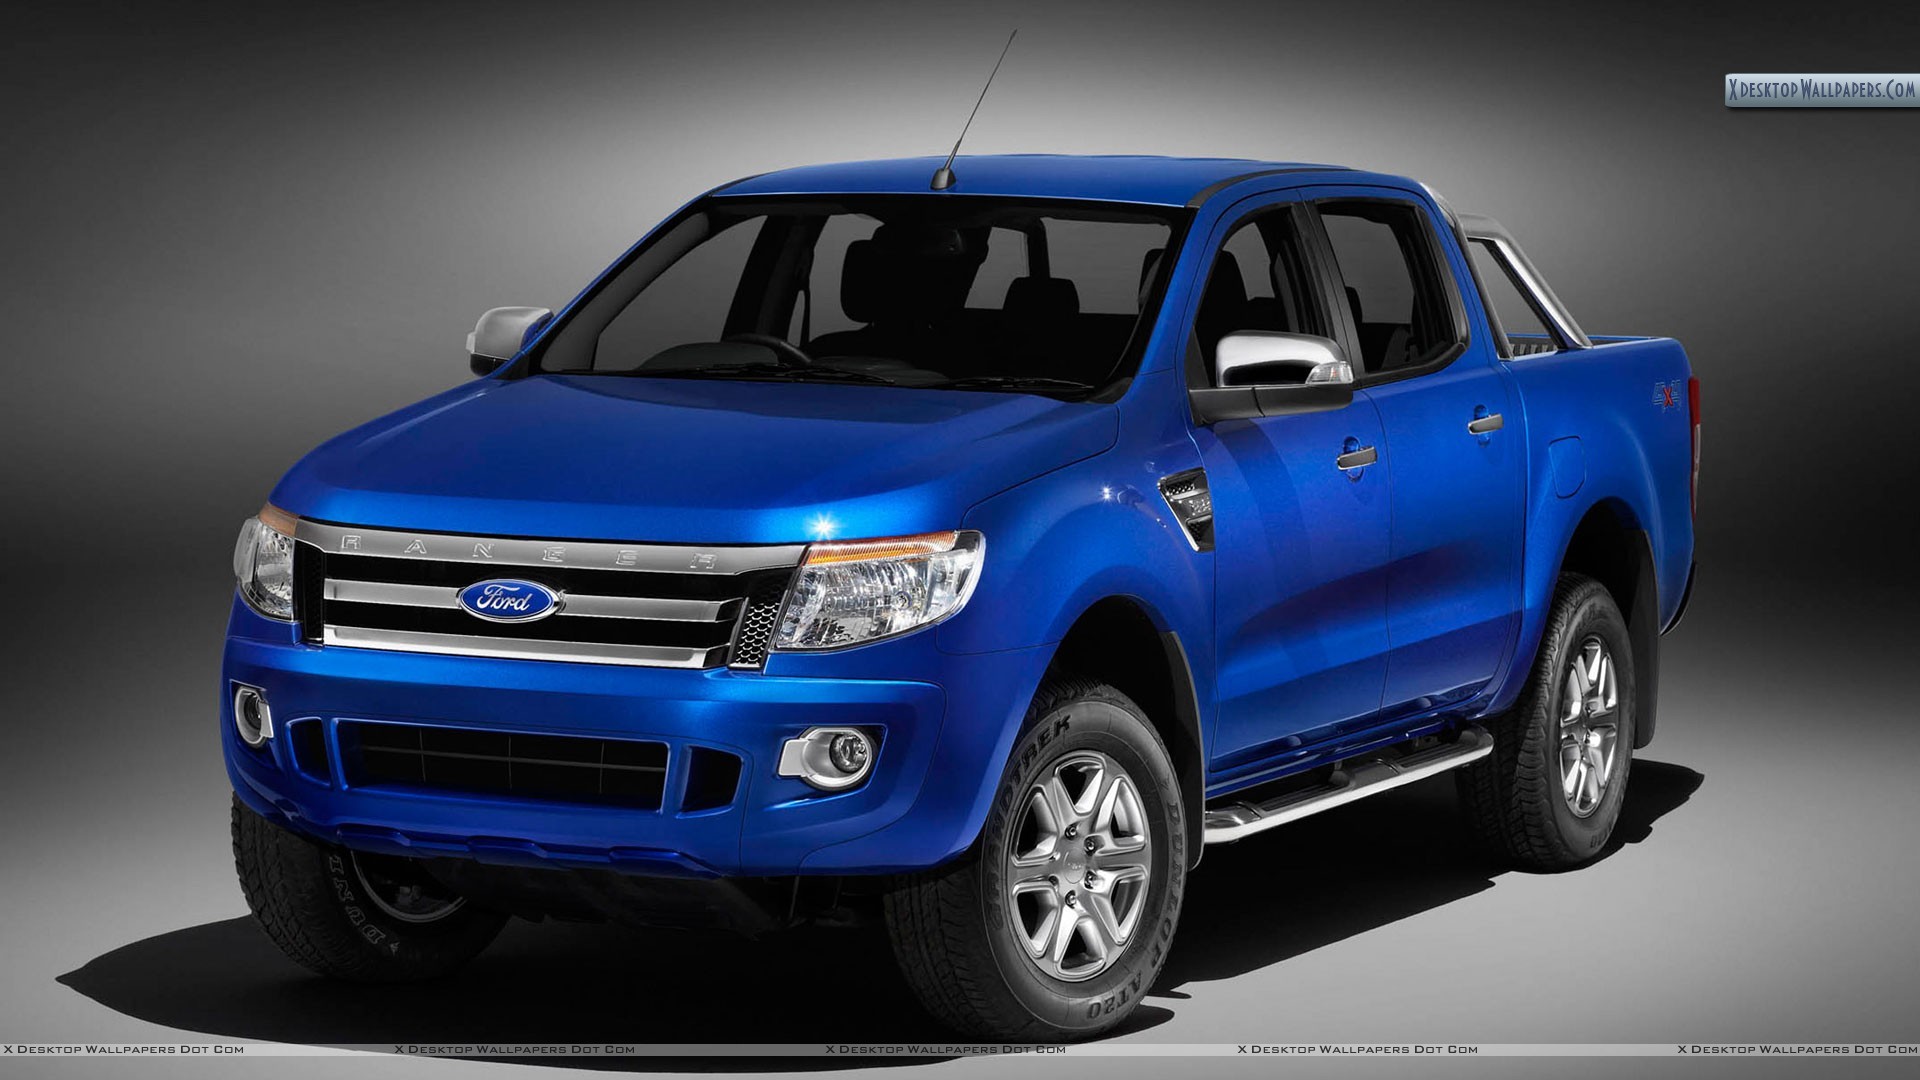 1920x1080 You are viewing wallpaper titled "Blue Color Ford Ranger ...